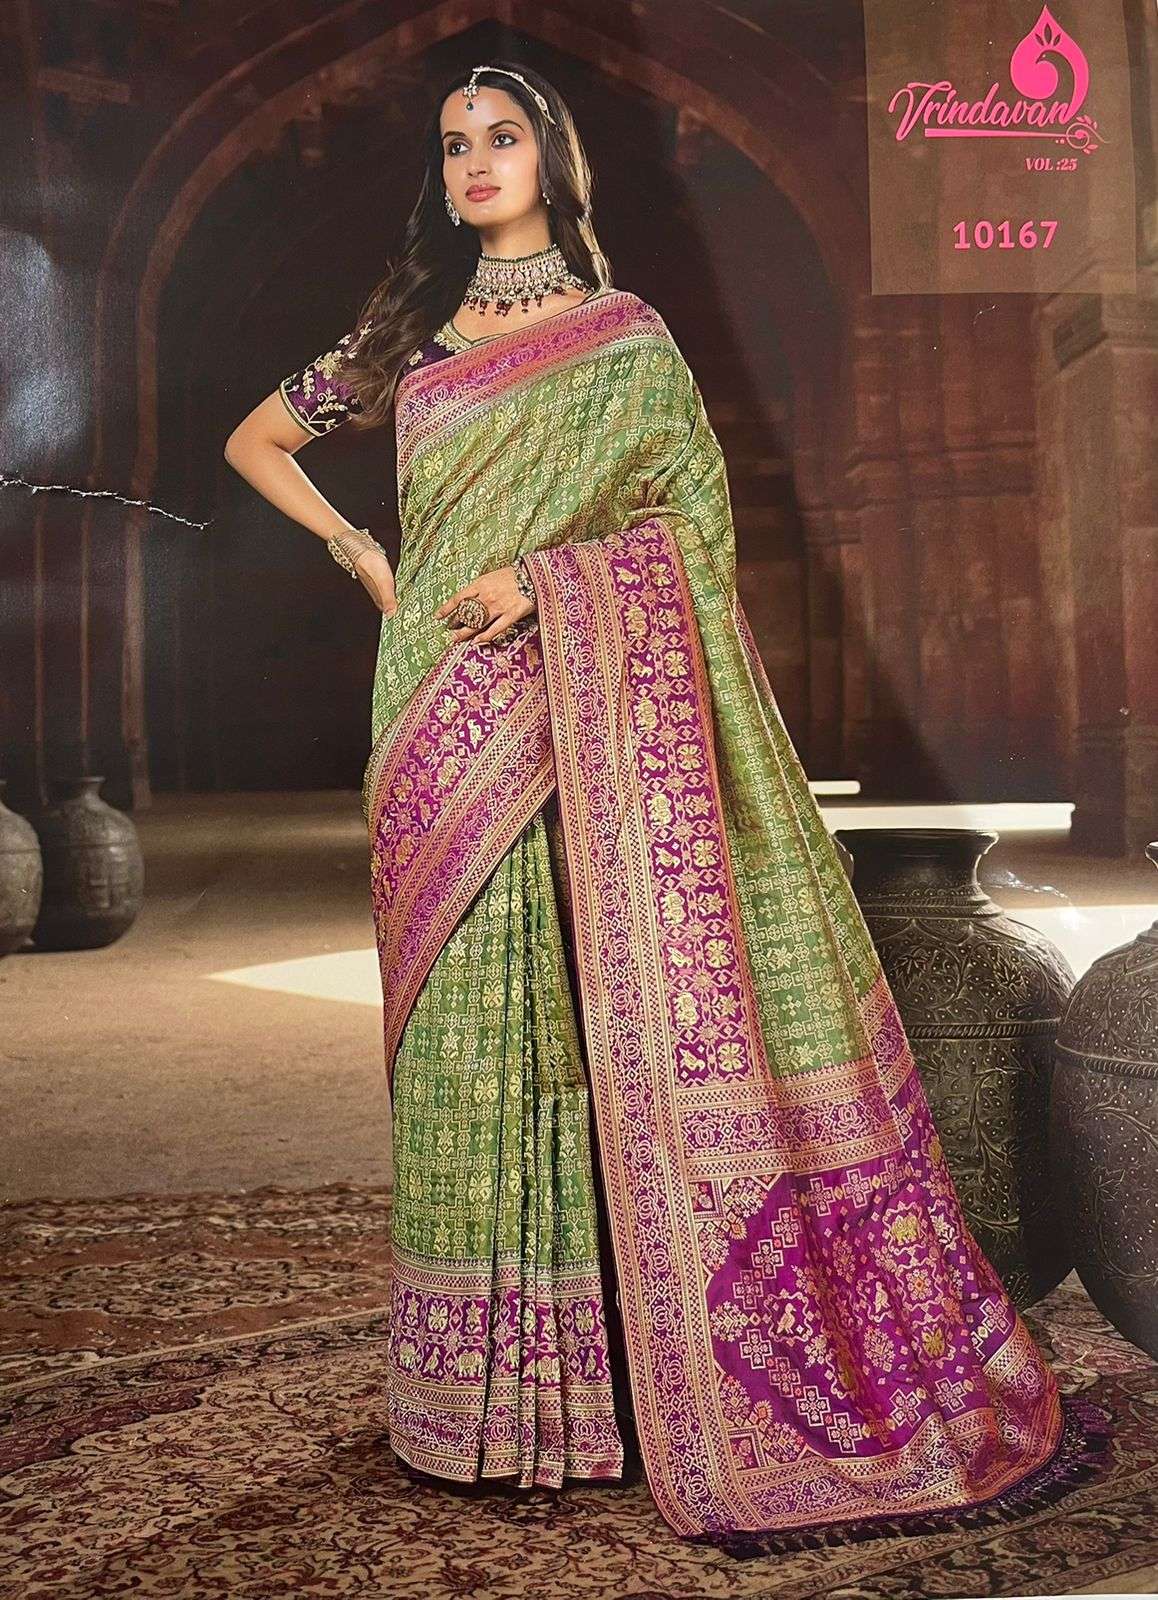 Vrindavan Vol-25 By Vrindavan 10166 To 10180 Series Indian Traditional Wear Collection Beautiful Stylish Fancy Colorful Party Wear & Occasional Wear Silk Sarees At Wholesale Price